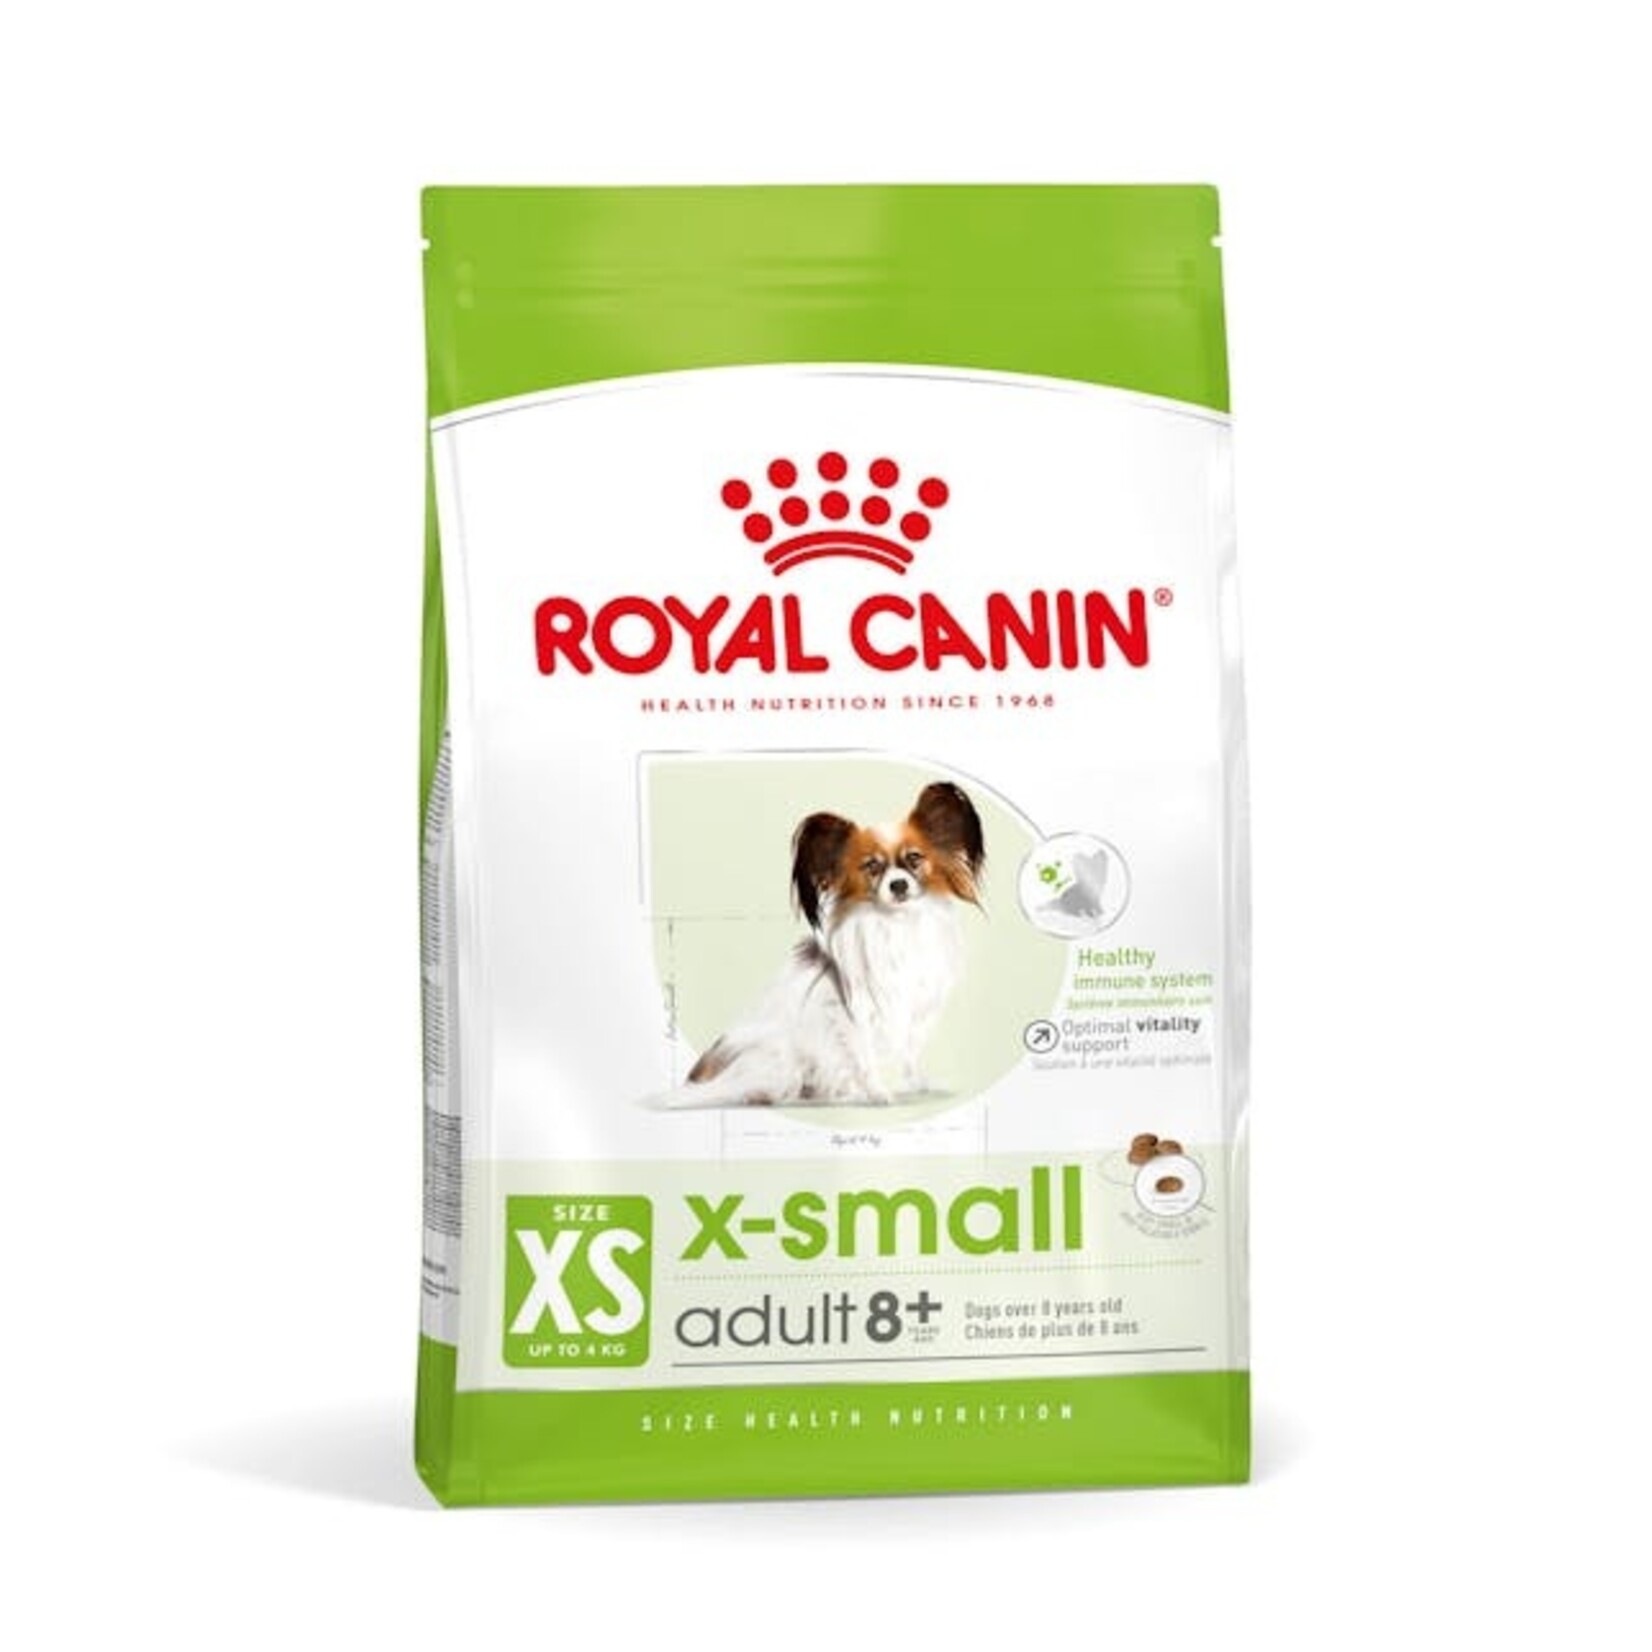 Royal Canin X-Small Adult 8+ Dog Dry Food, 1.5kg